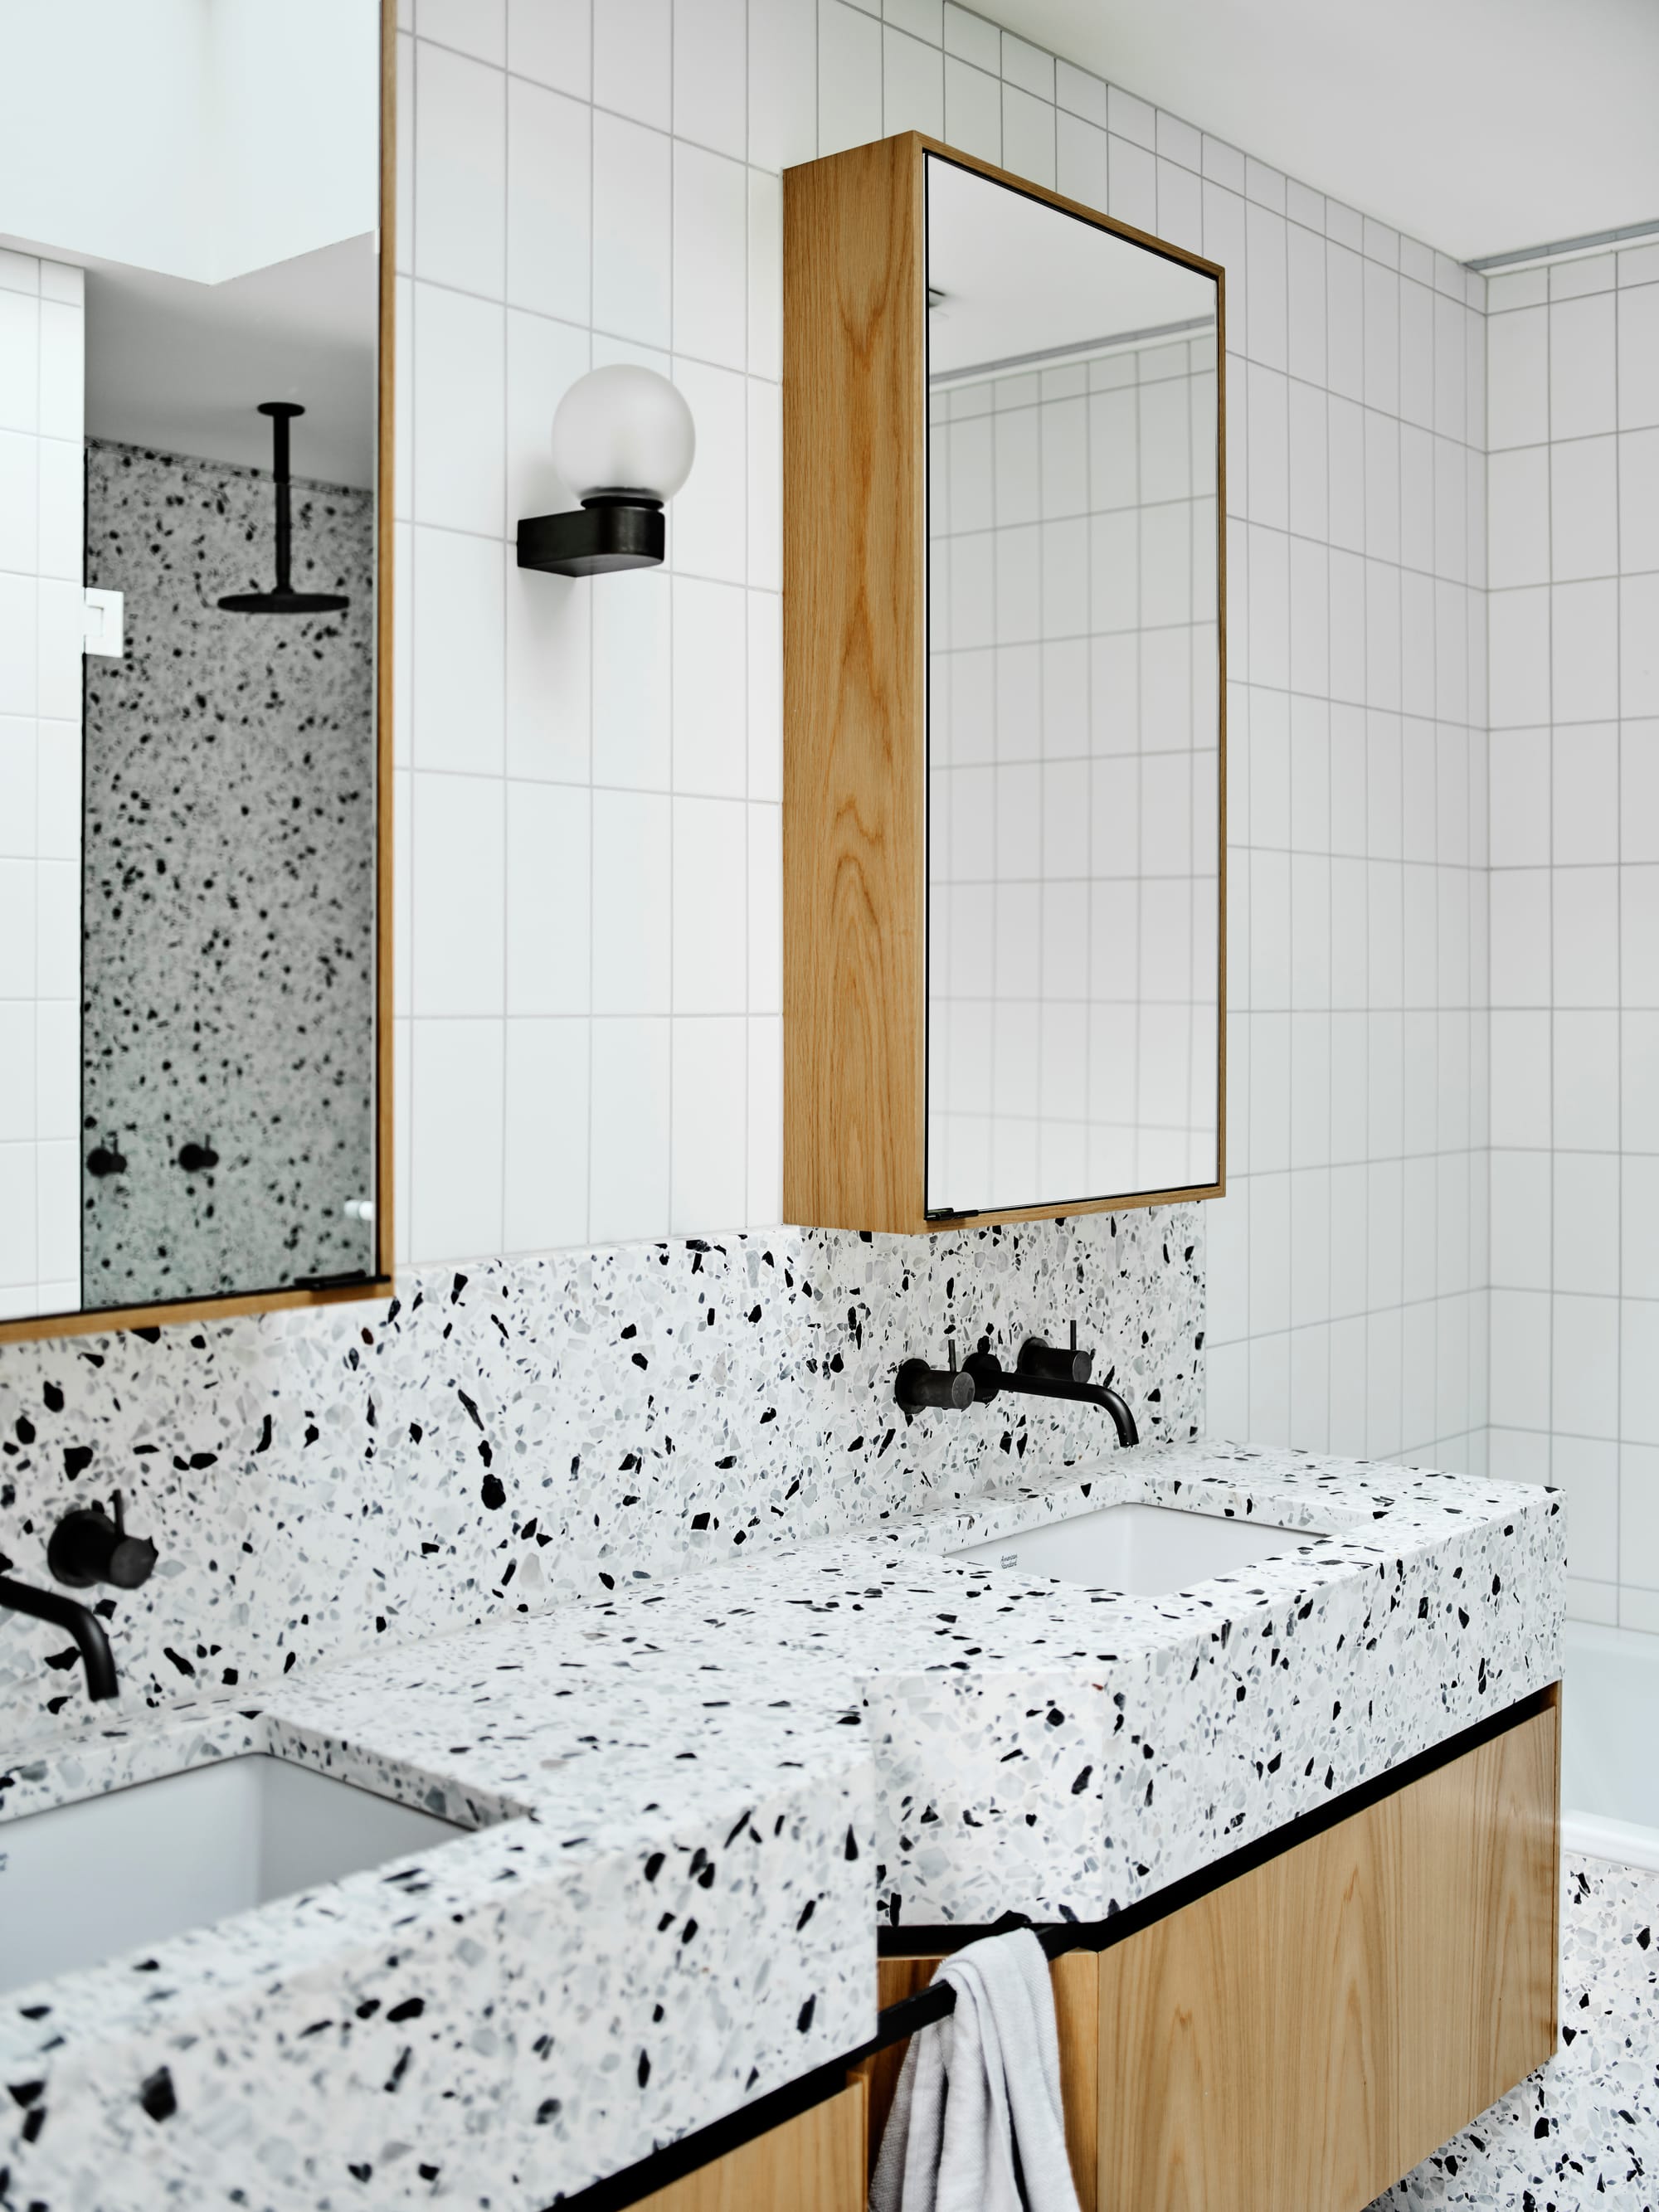 ZigZag House by True Story. Photography by Dean Bradley. Bathroom with white and black speckled terrazzo countertops and splashback. Timber cabinetry. White tiled walls and timber framed mirrors.